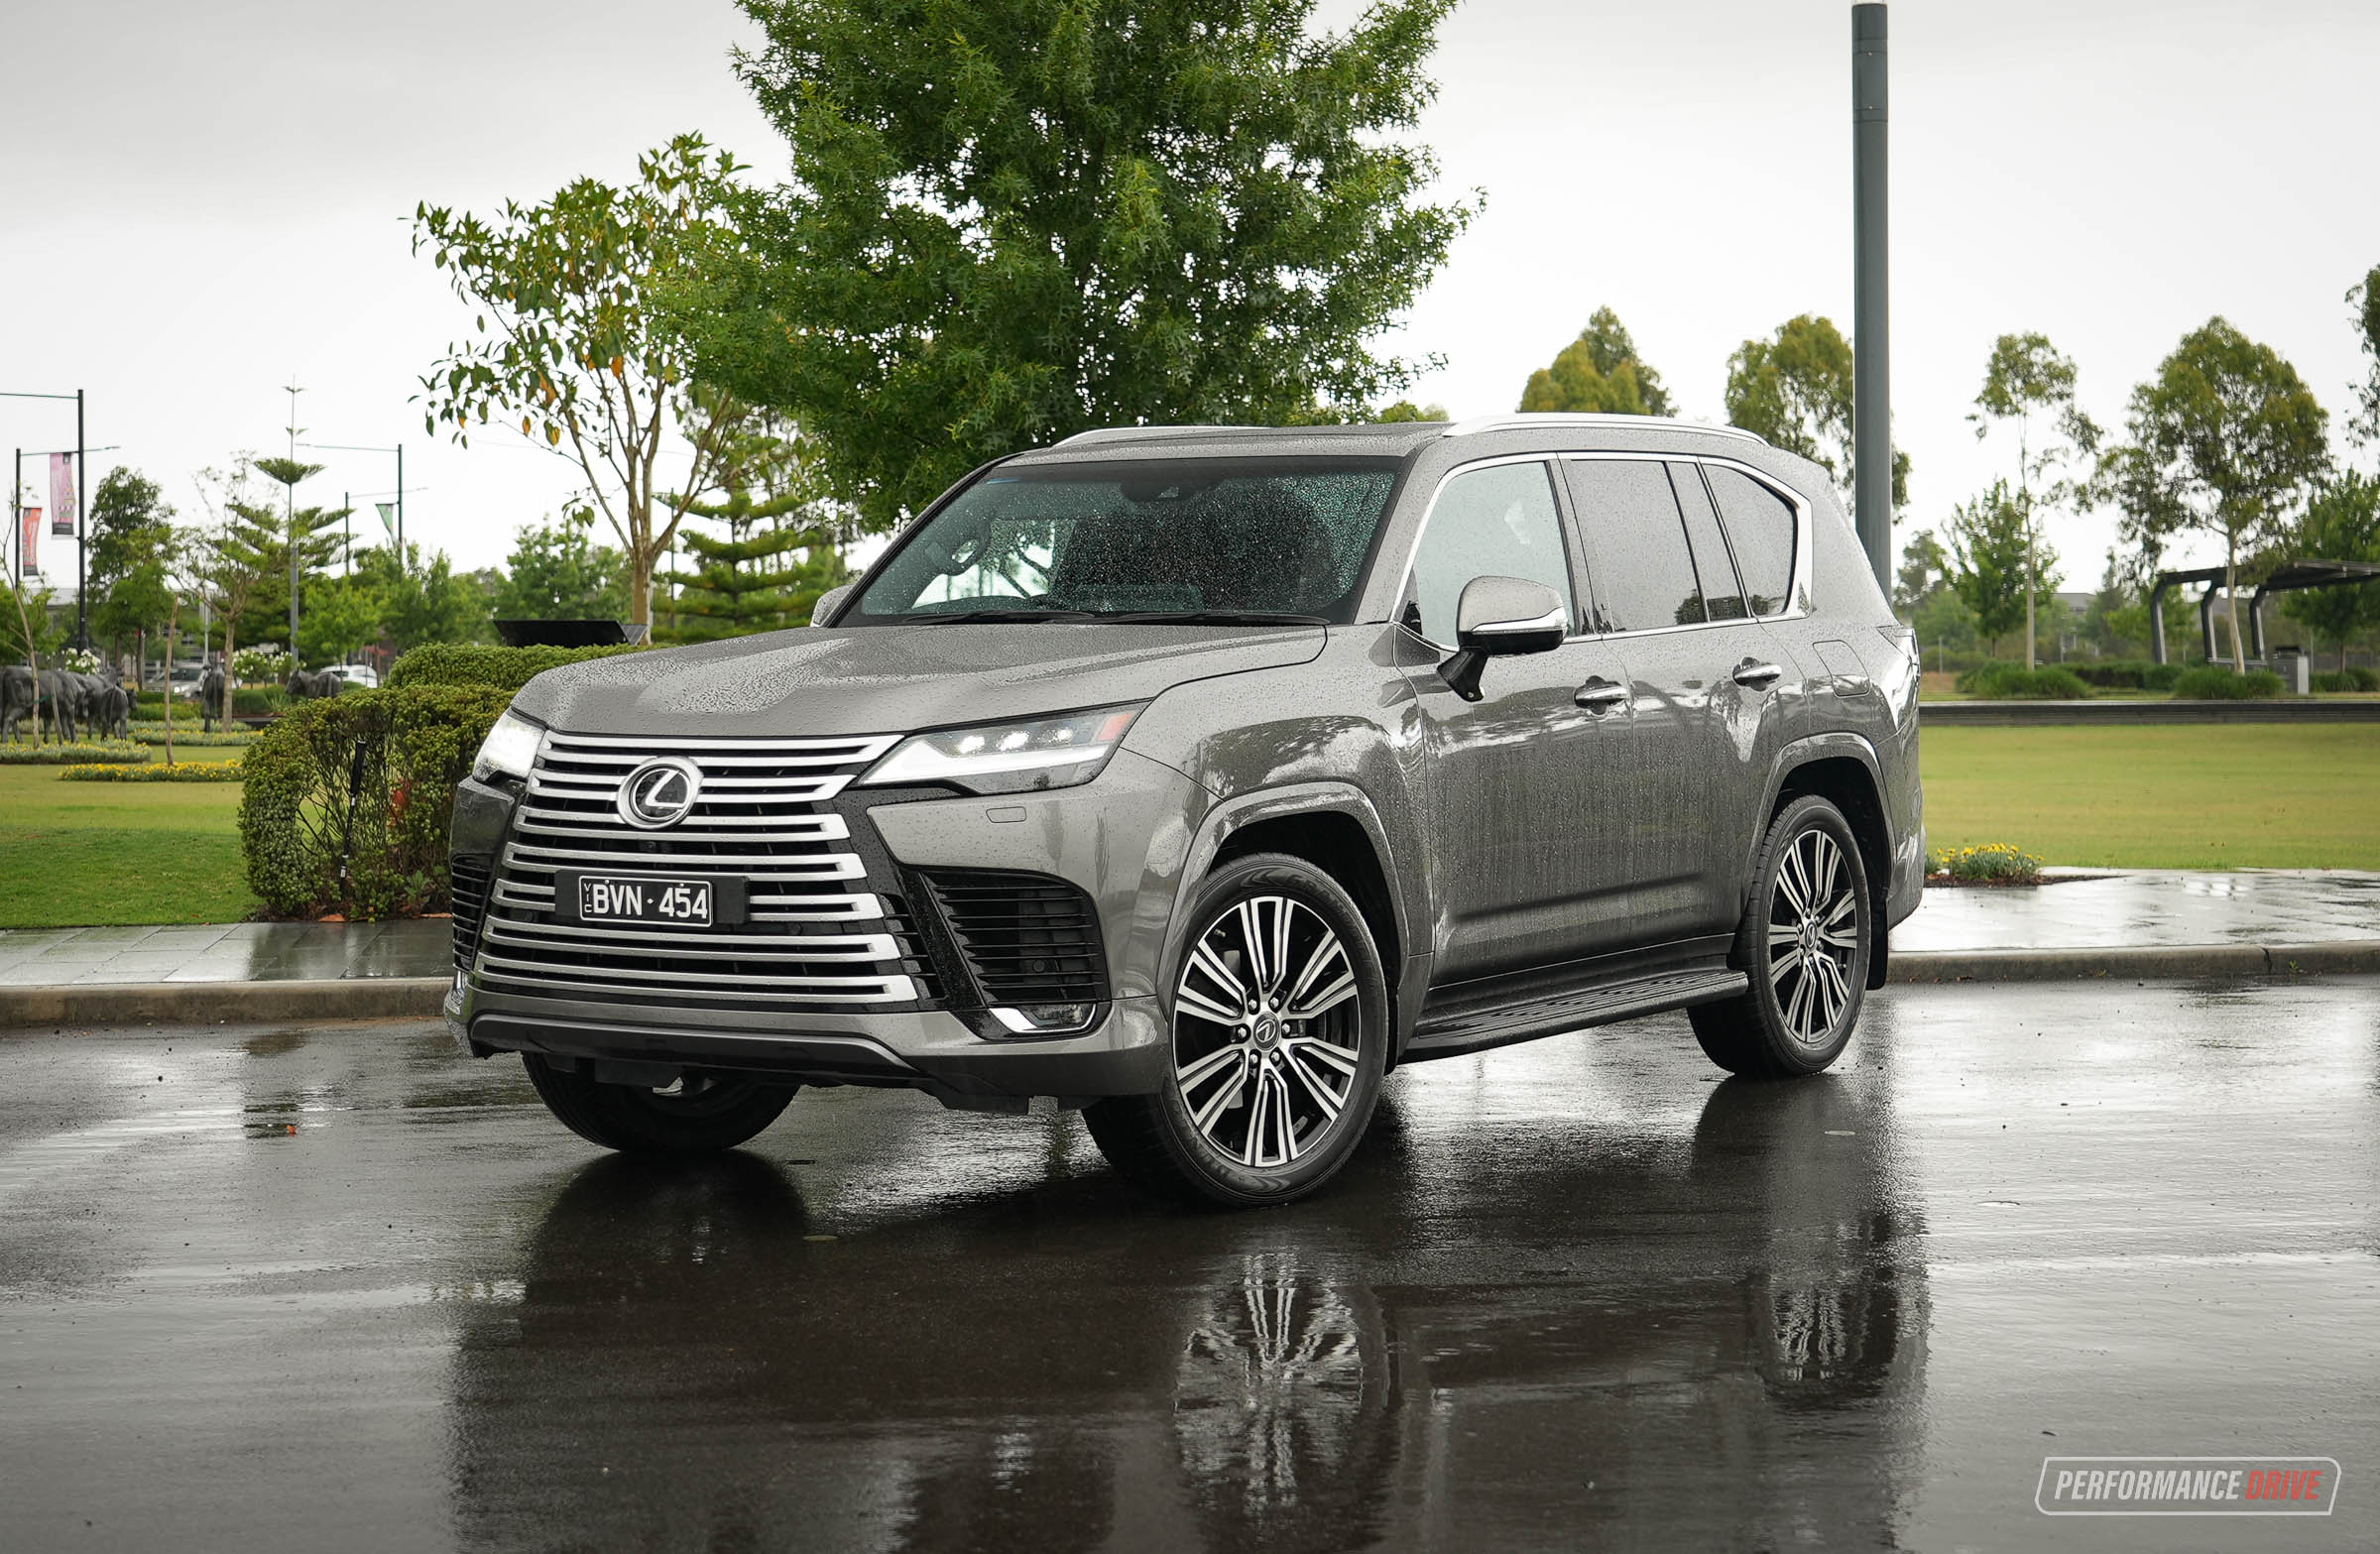 Auto review: Lexus LX 600 delivers big in size, comfort, and